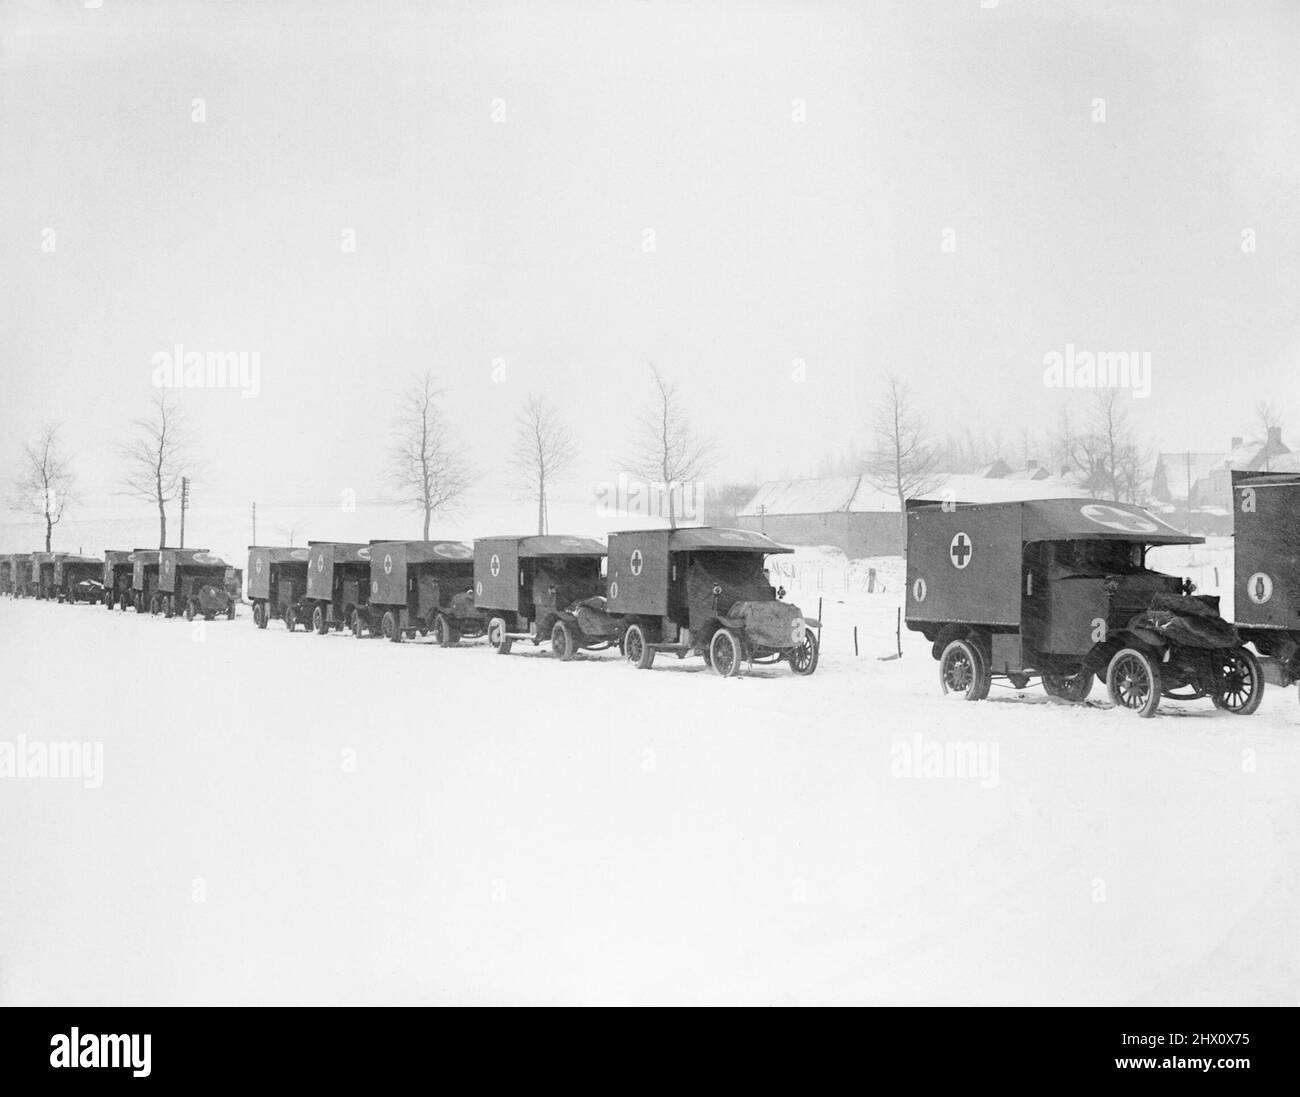 The 27th Motor Ambulance Convoy of the Royal Army Medical Corps awaiting orders on the snow-covered Saint-Pol-sur-Ternoise-Arras road, February 1917. Stock Photo